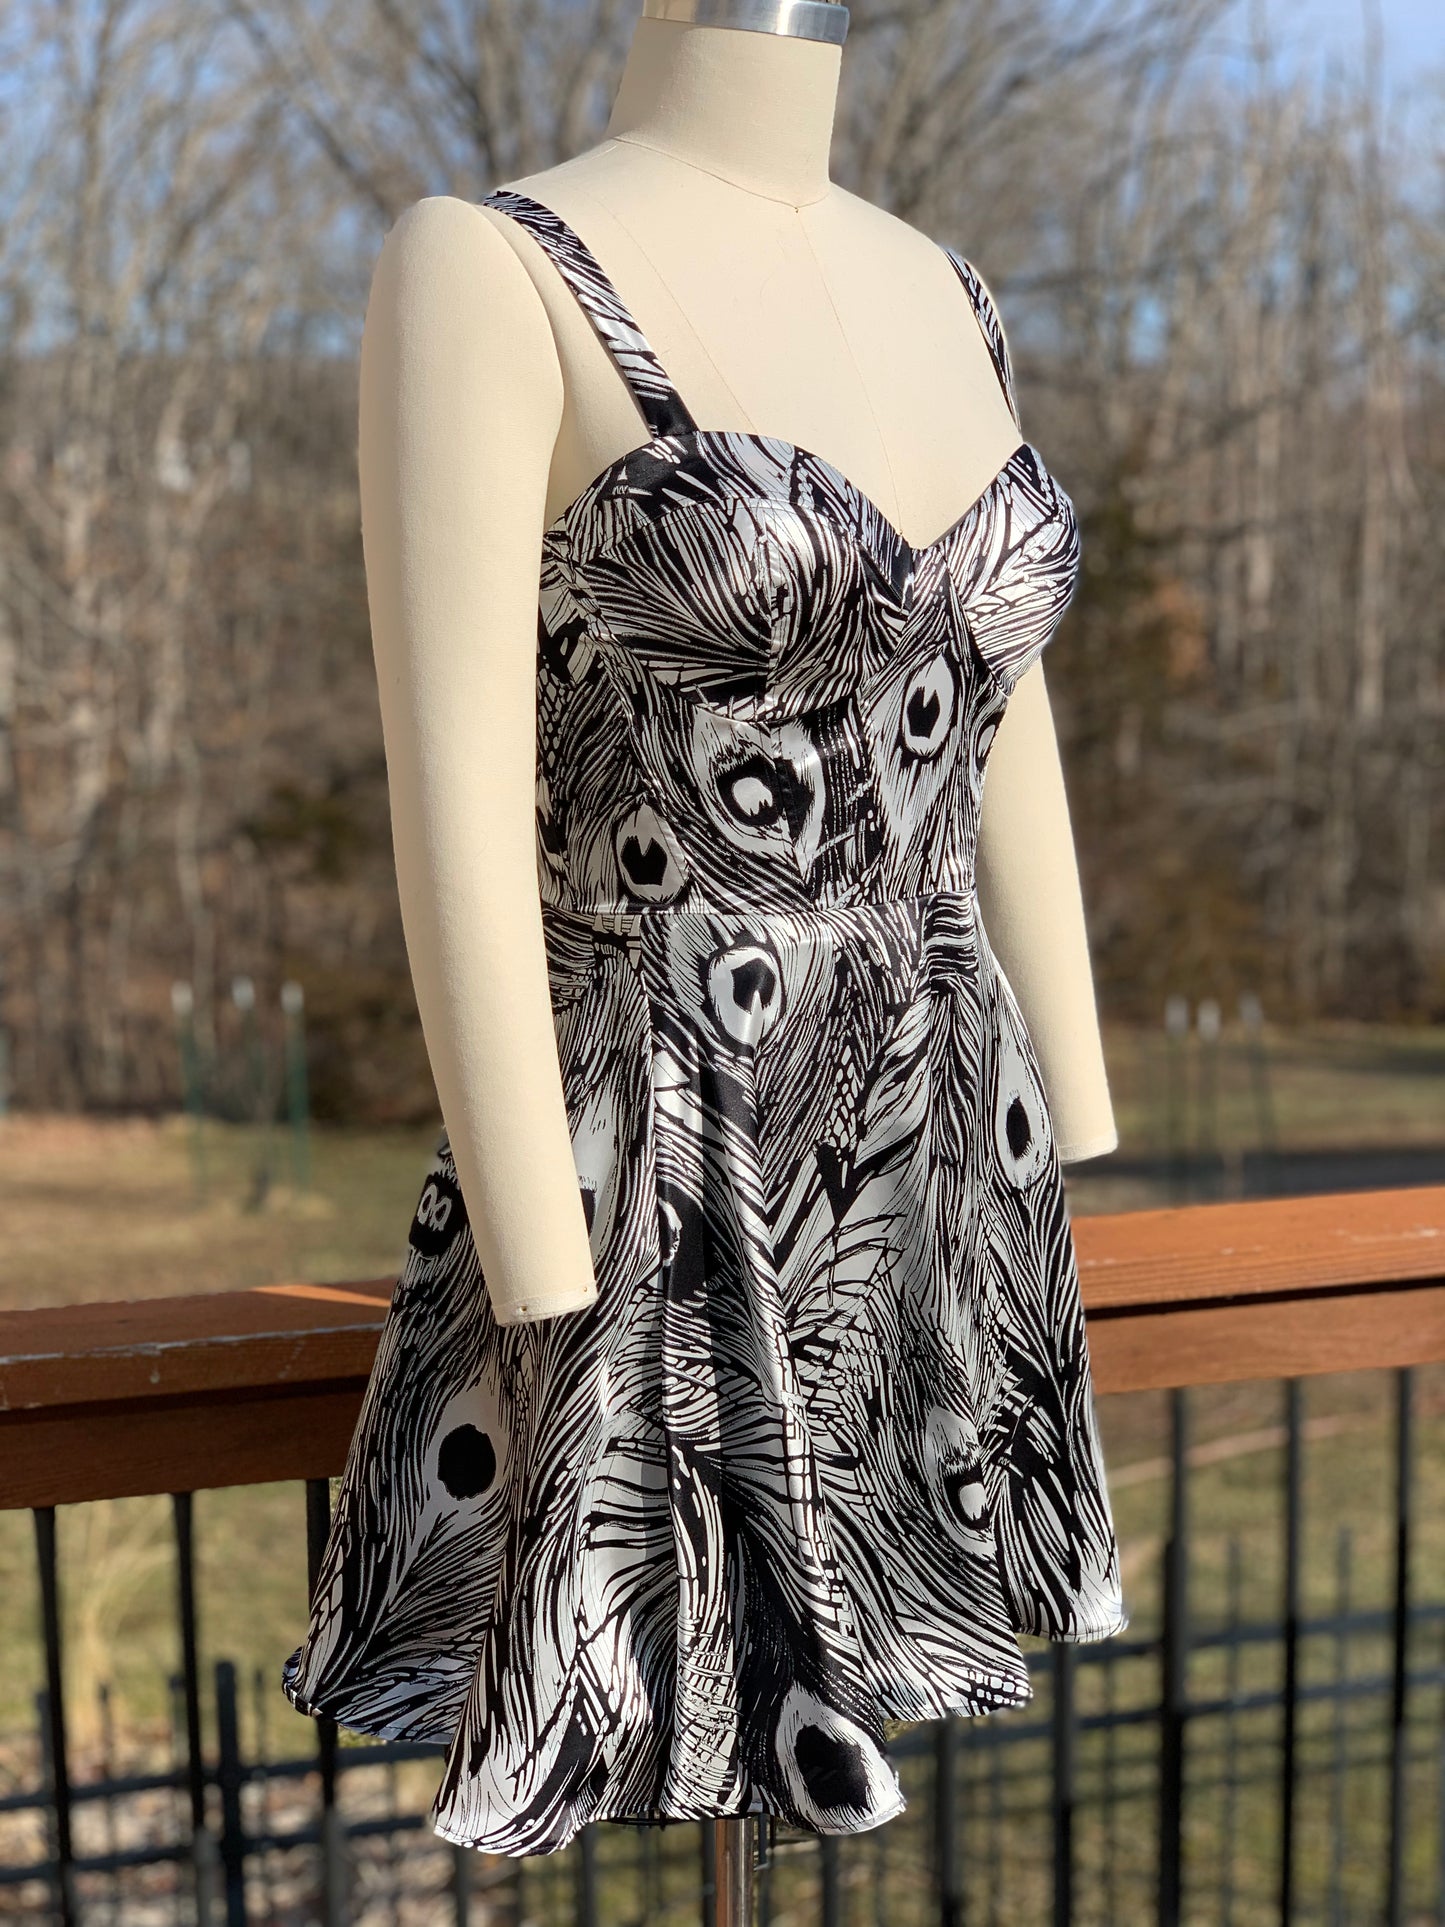 Silk Charmeuse Corset Dress - Black and White Peacock Feather Print - Size 12/14